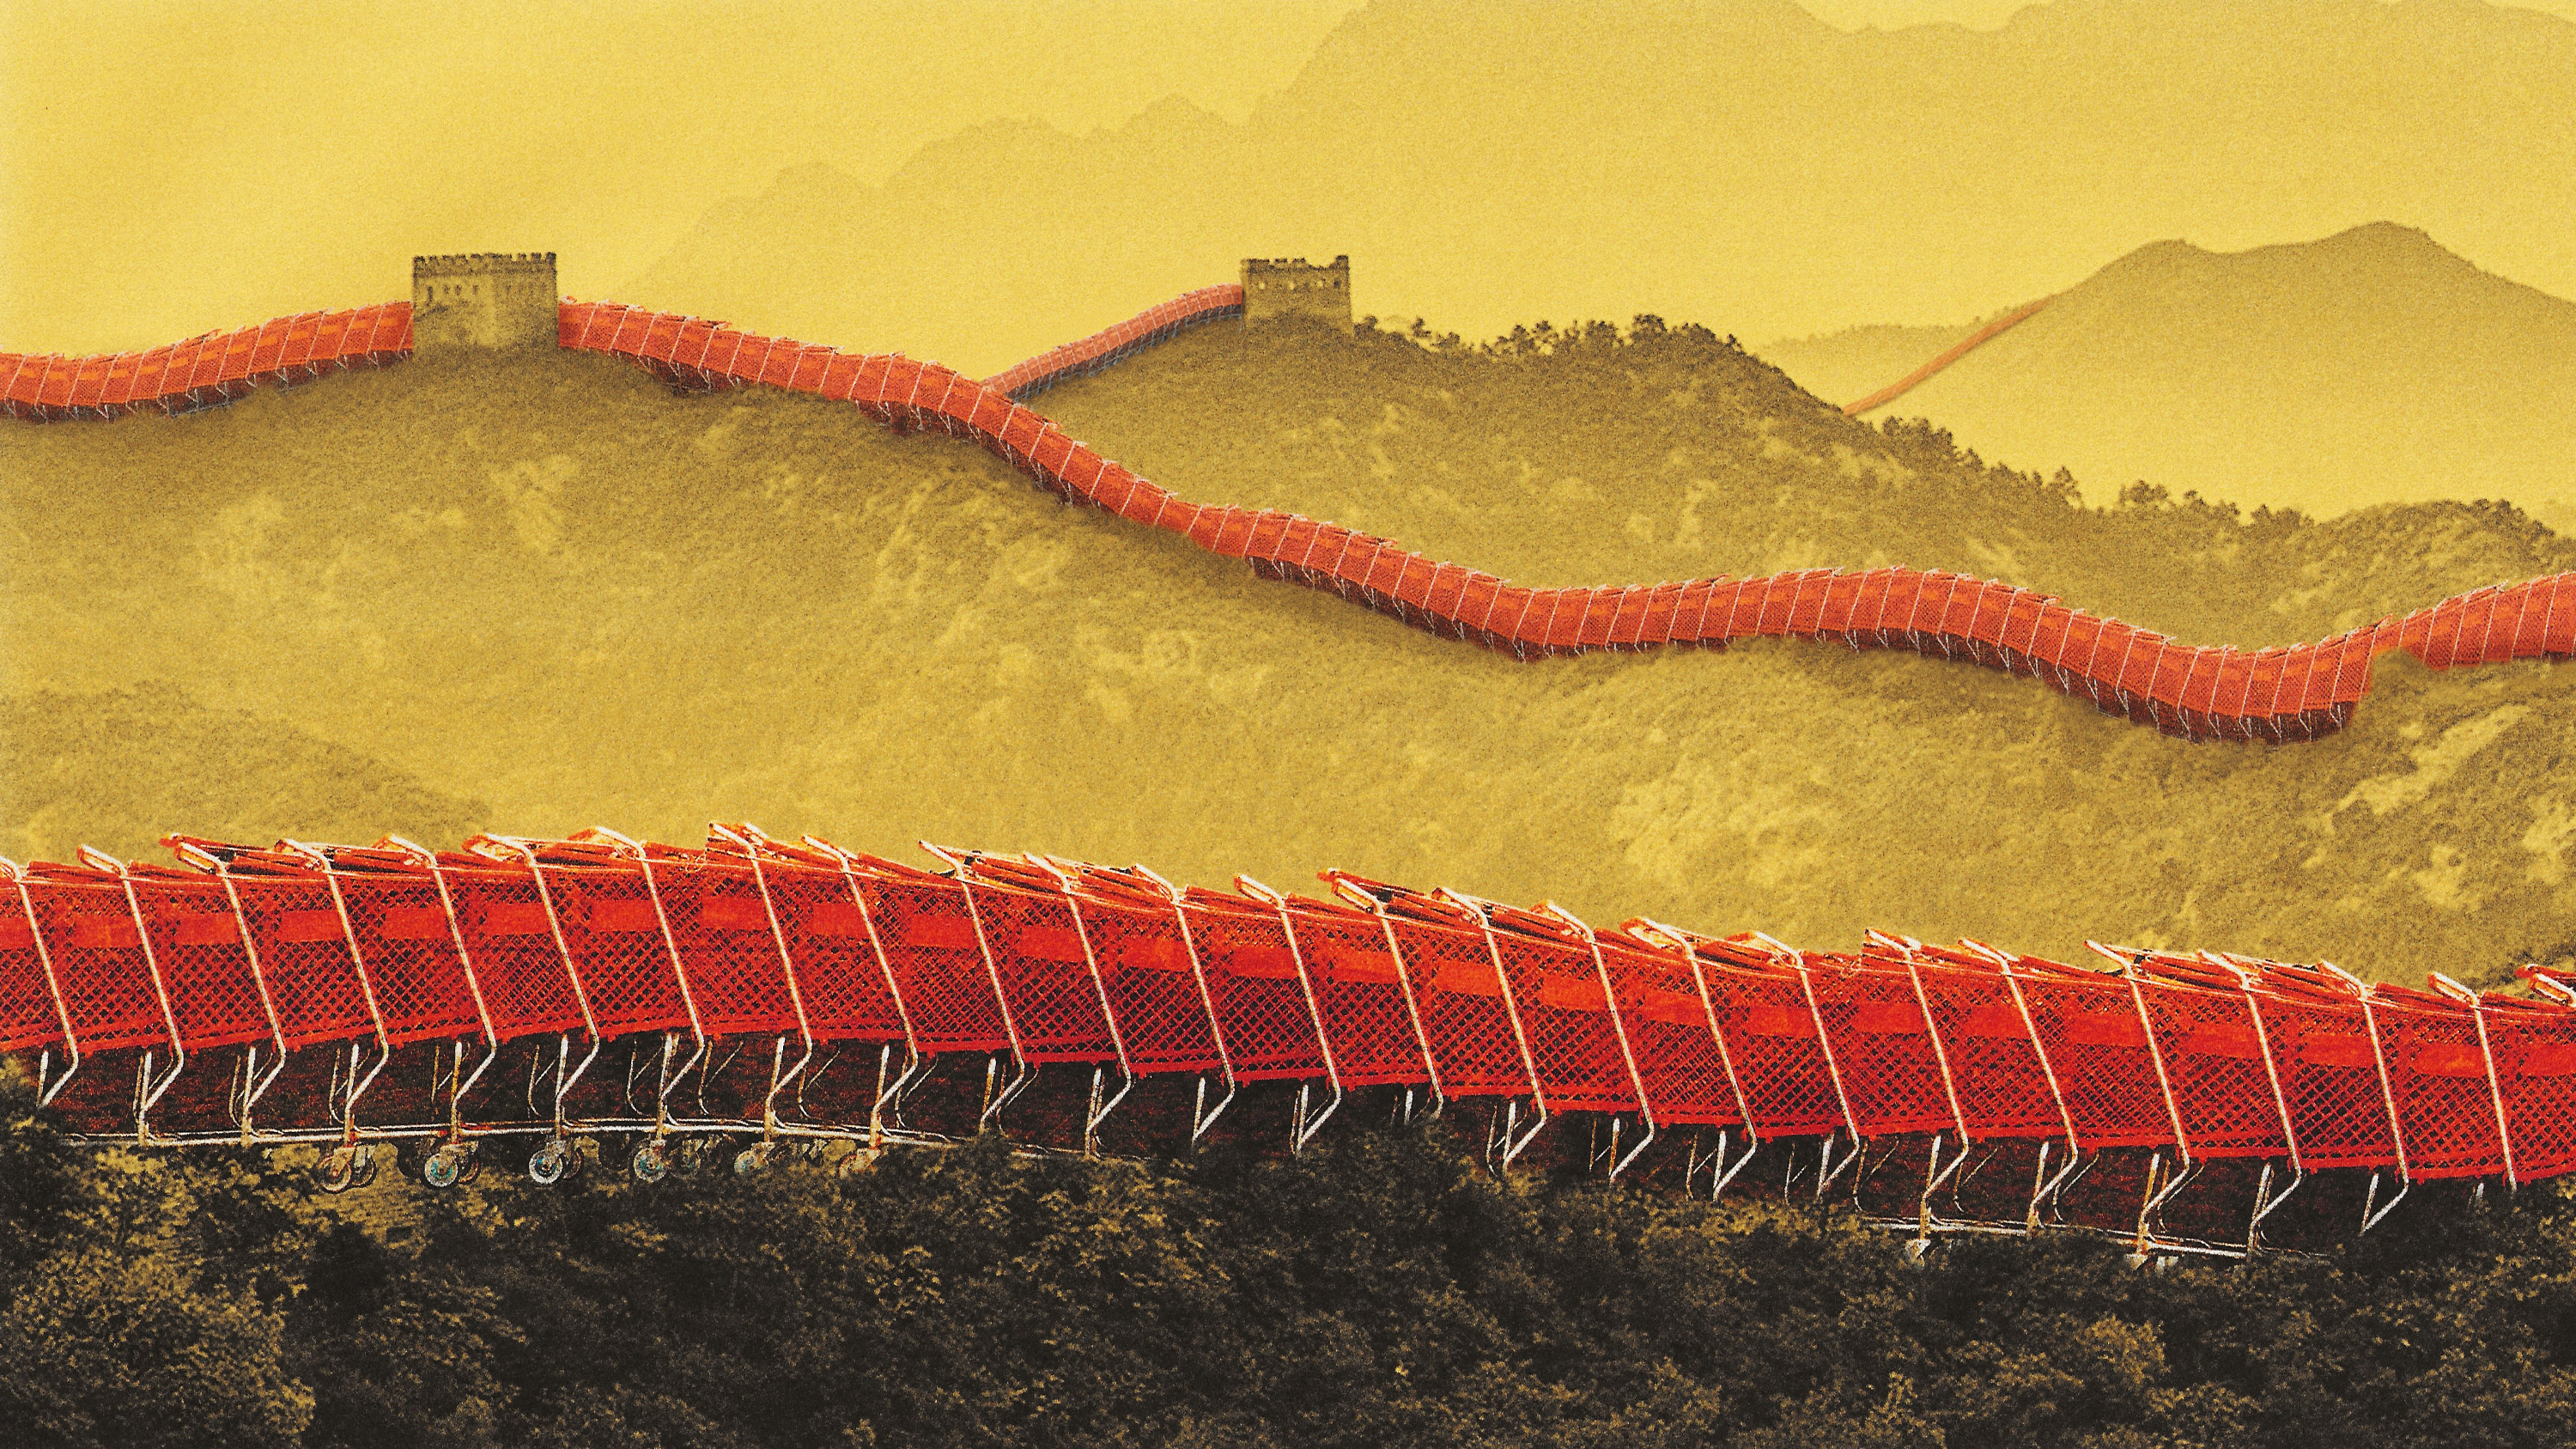 conceptual illustration of shopping carts forming the great wall of China